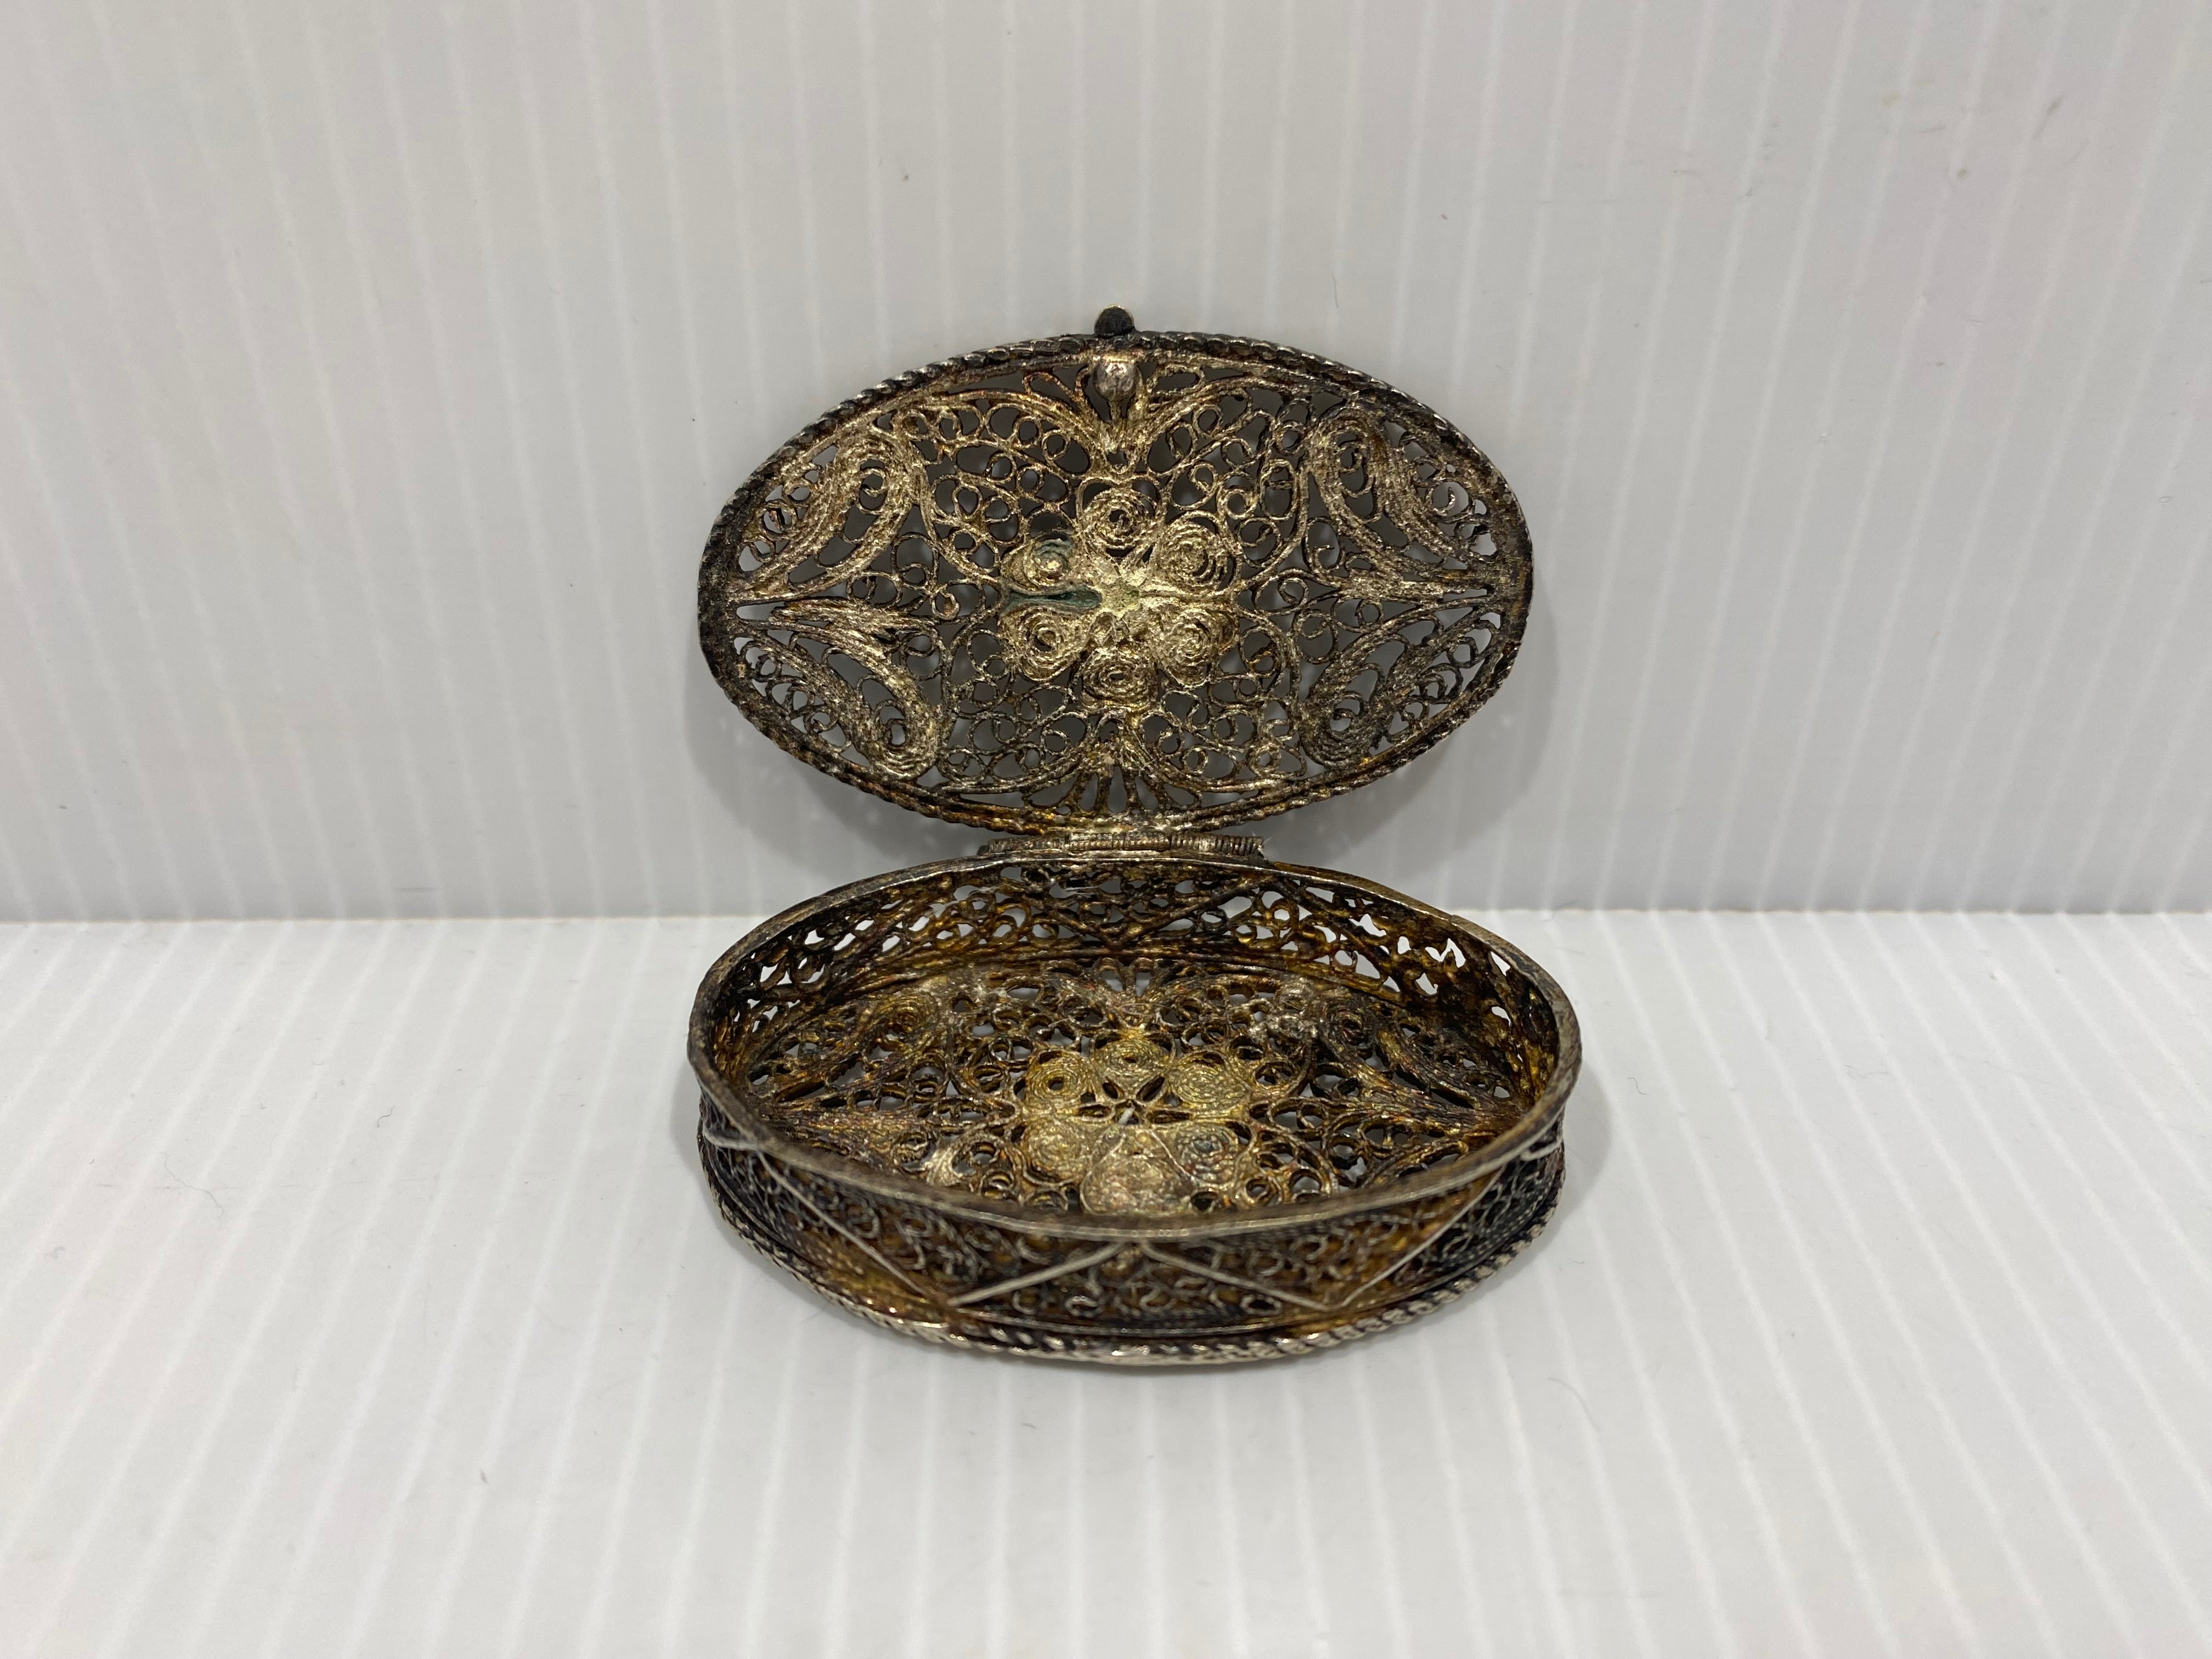 Antique Italian,  Silver Filigree Pill Box, c.1900 with pull-off lid.